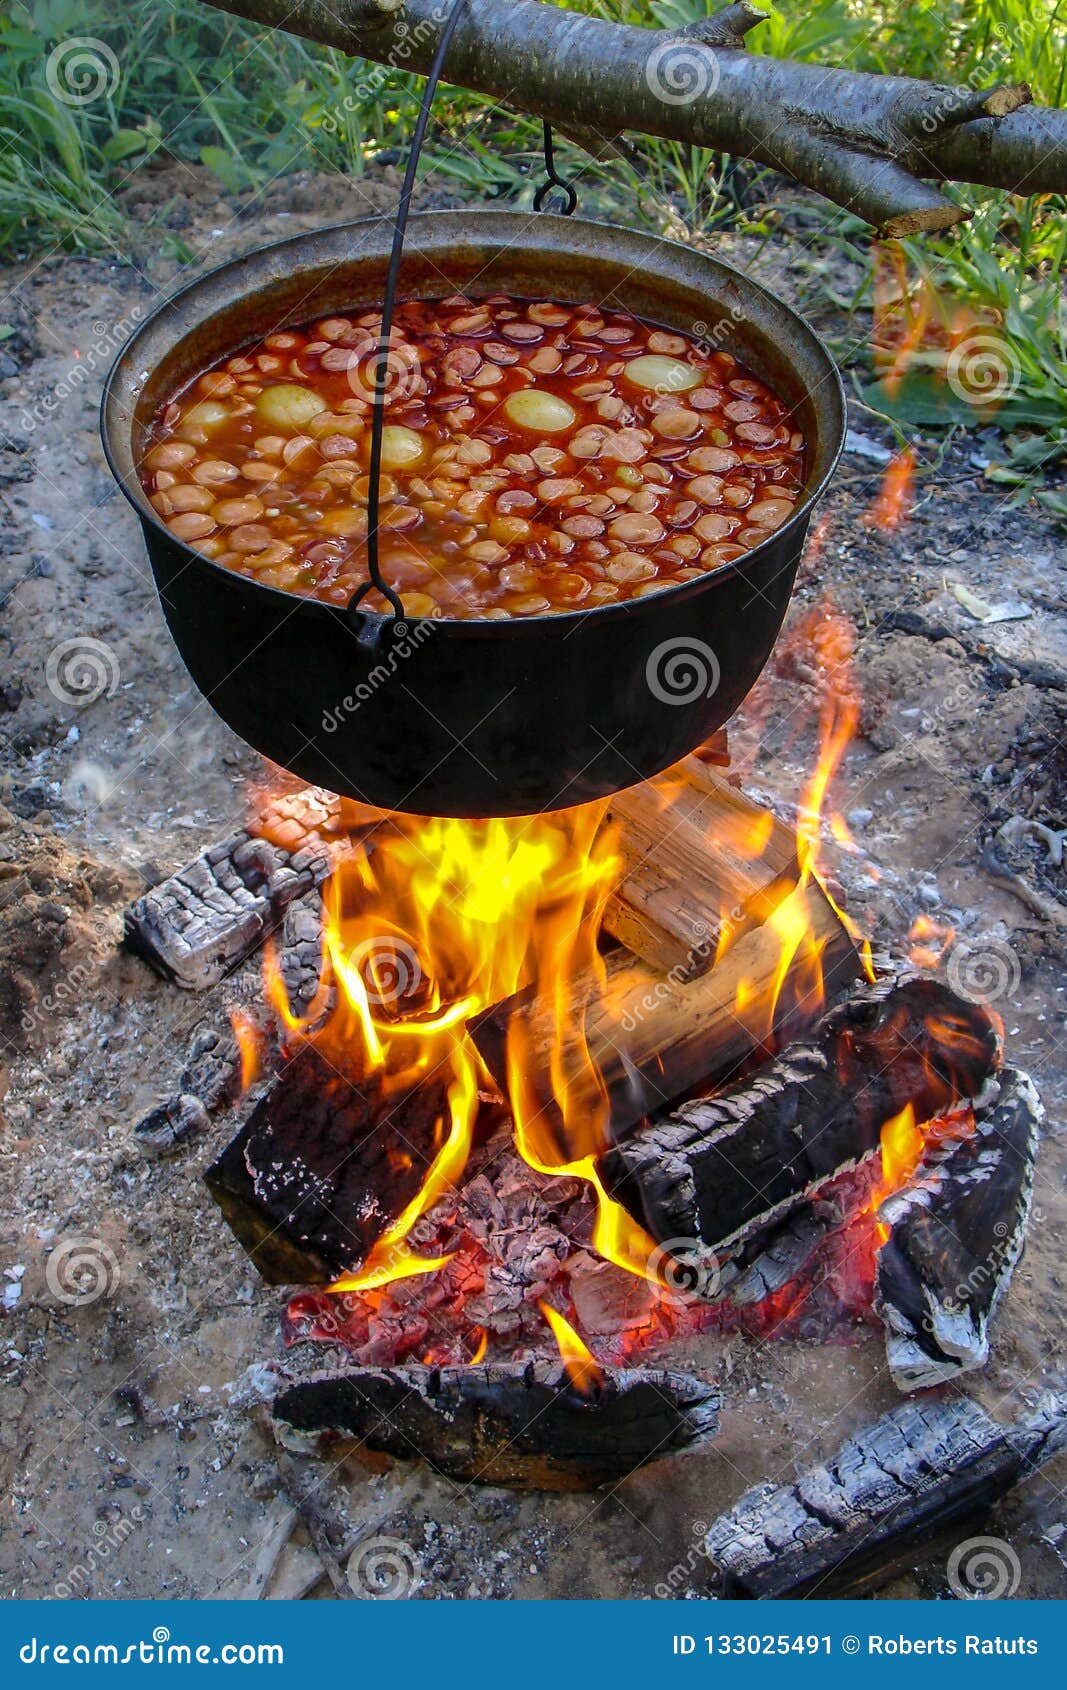 Outdoor Cooking on a Camping Trip